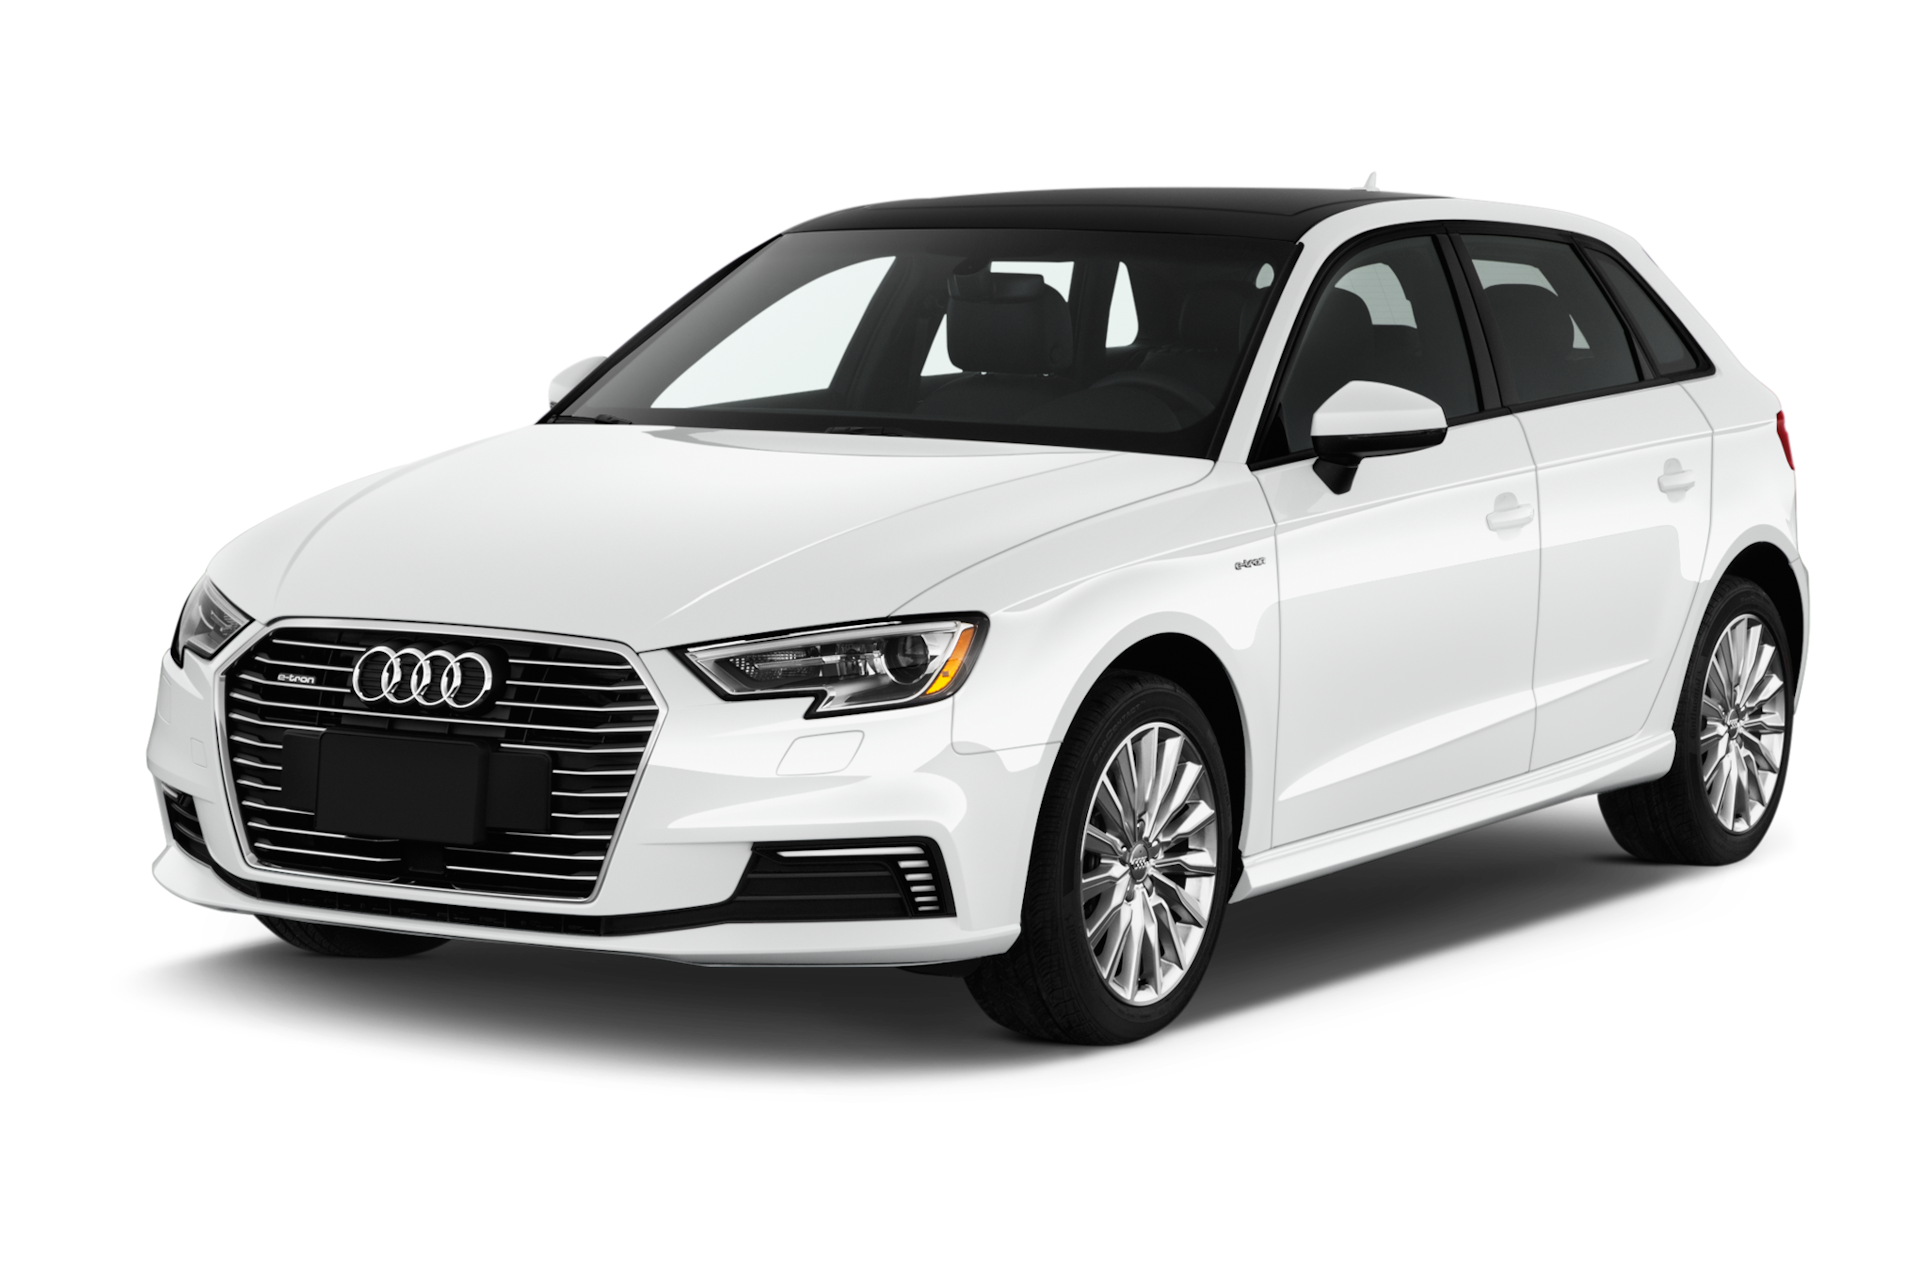 2017 Audi A3 e-tron Prices, Reviews, and Photos - MotorTrend